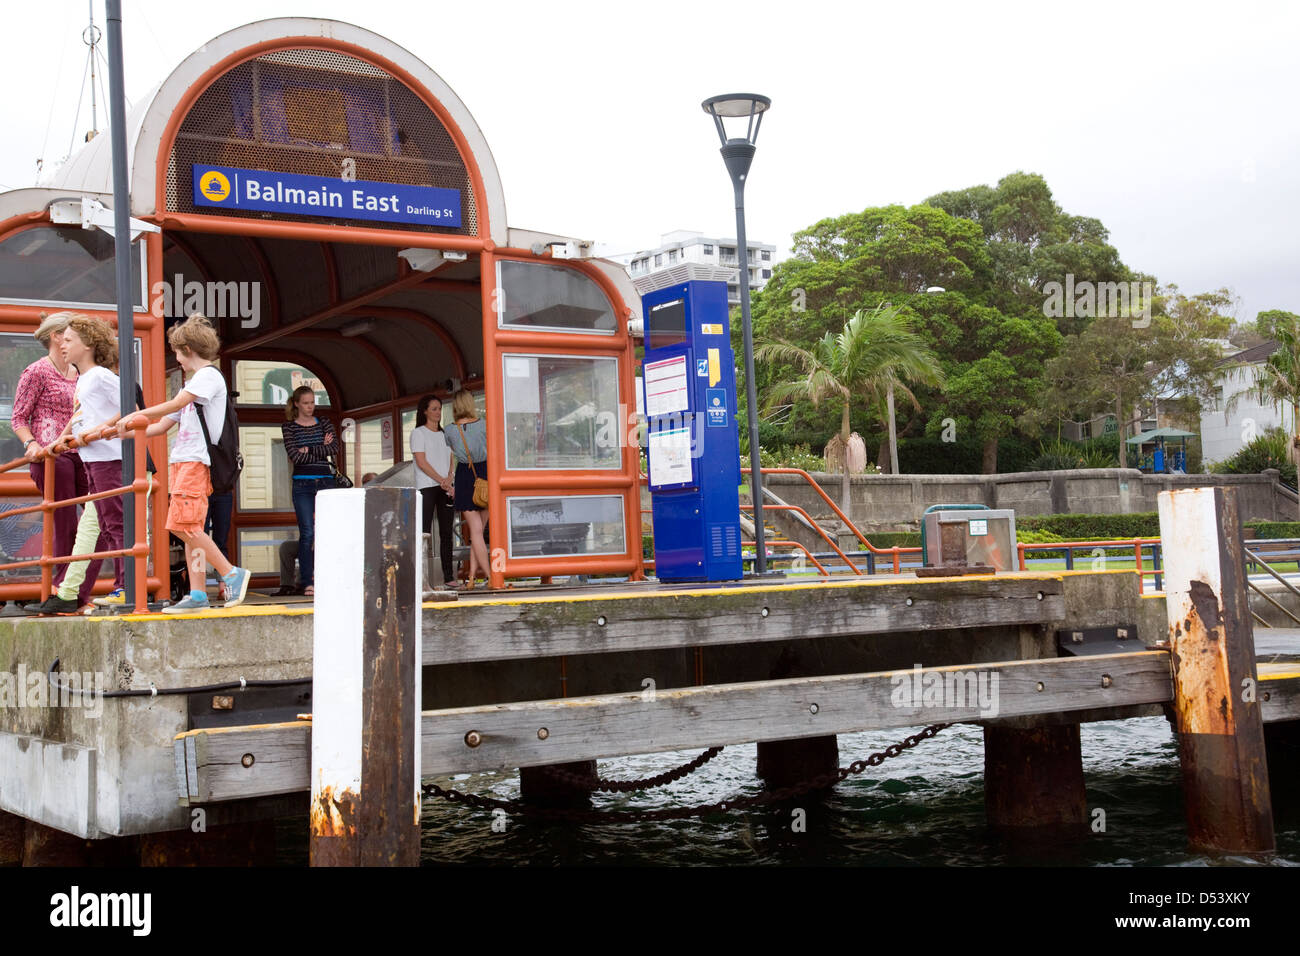 Balmain east sferry wharf on Sydney harbour with passengers and children waiting to board a Sydney ferry,NSW,Australia Stock Photo